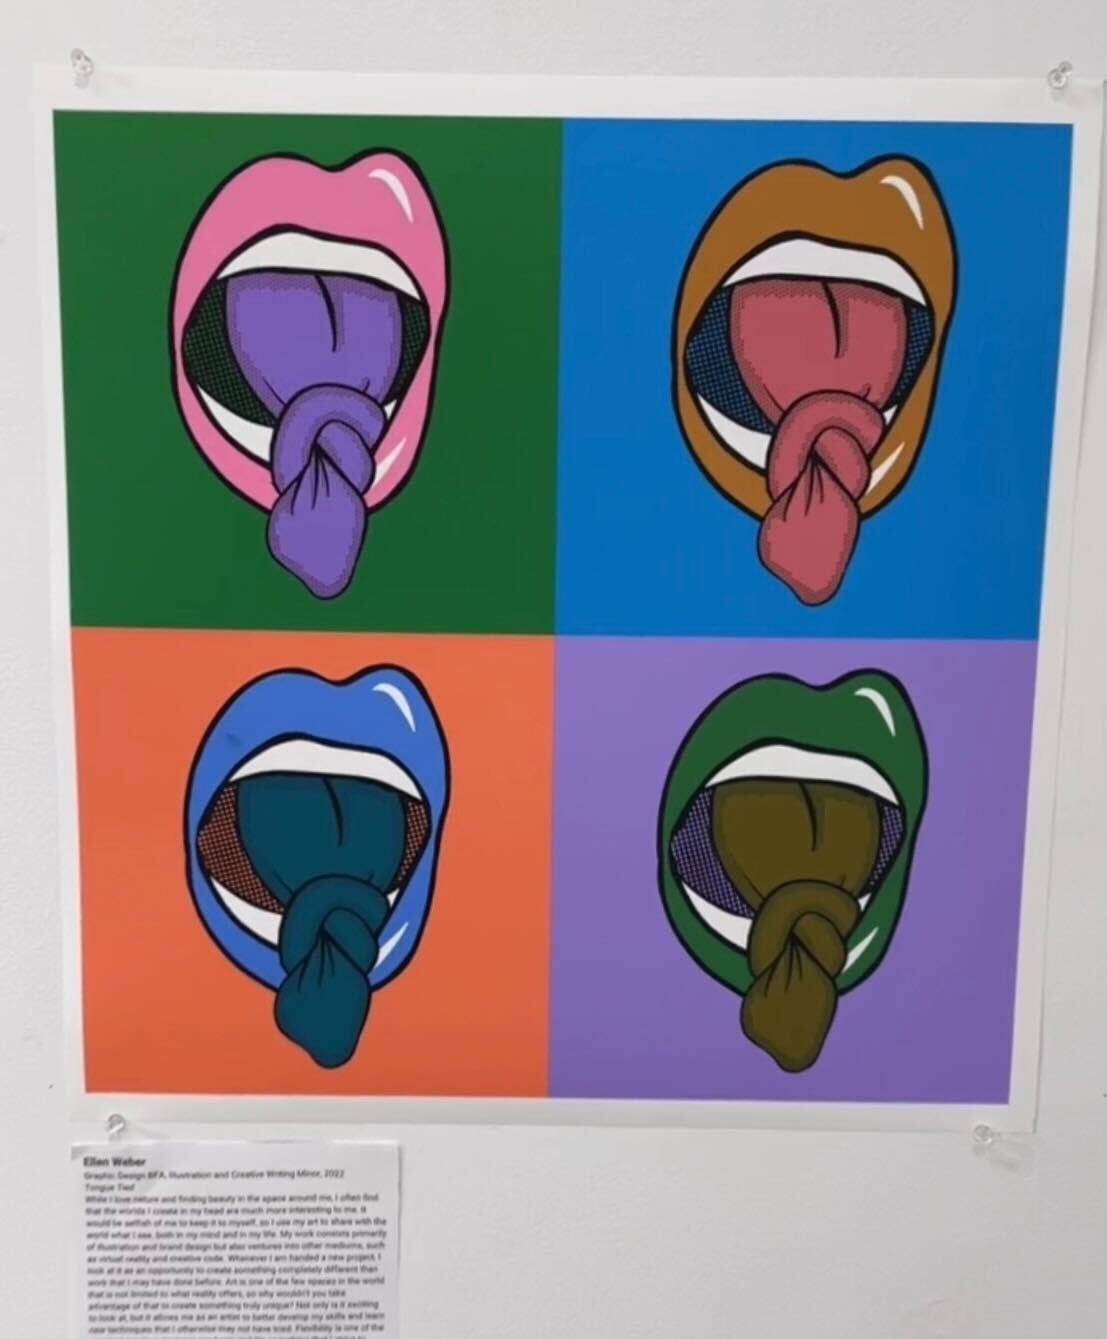 Image that shows four quadrants of tongues tied in knots in multiple colors